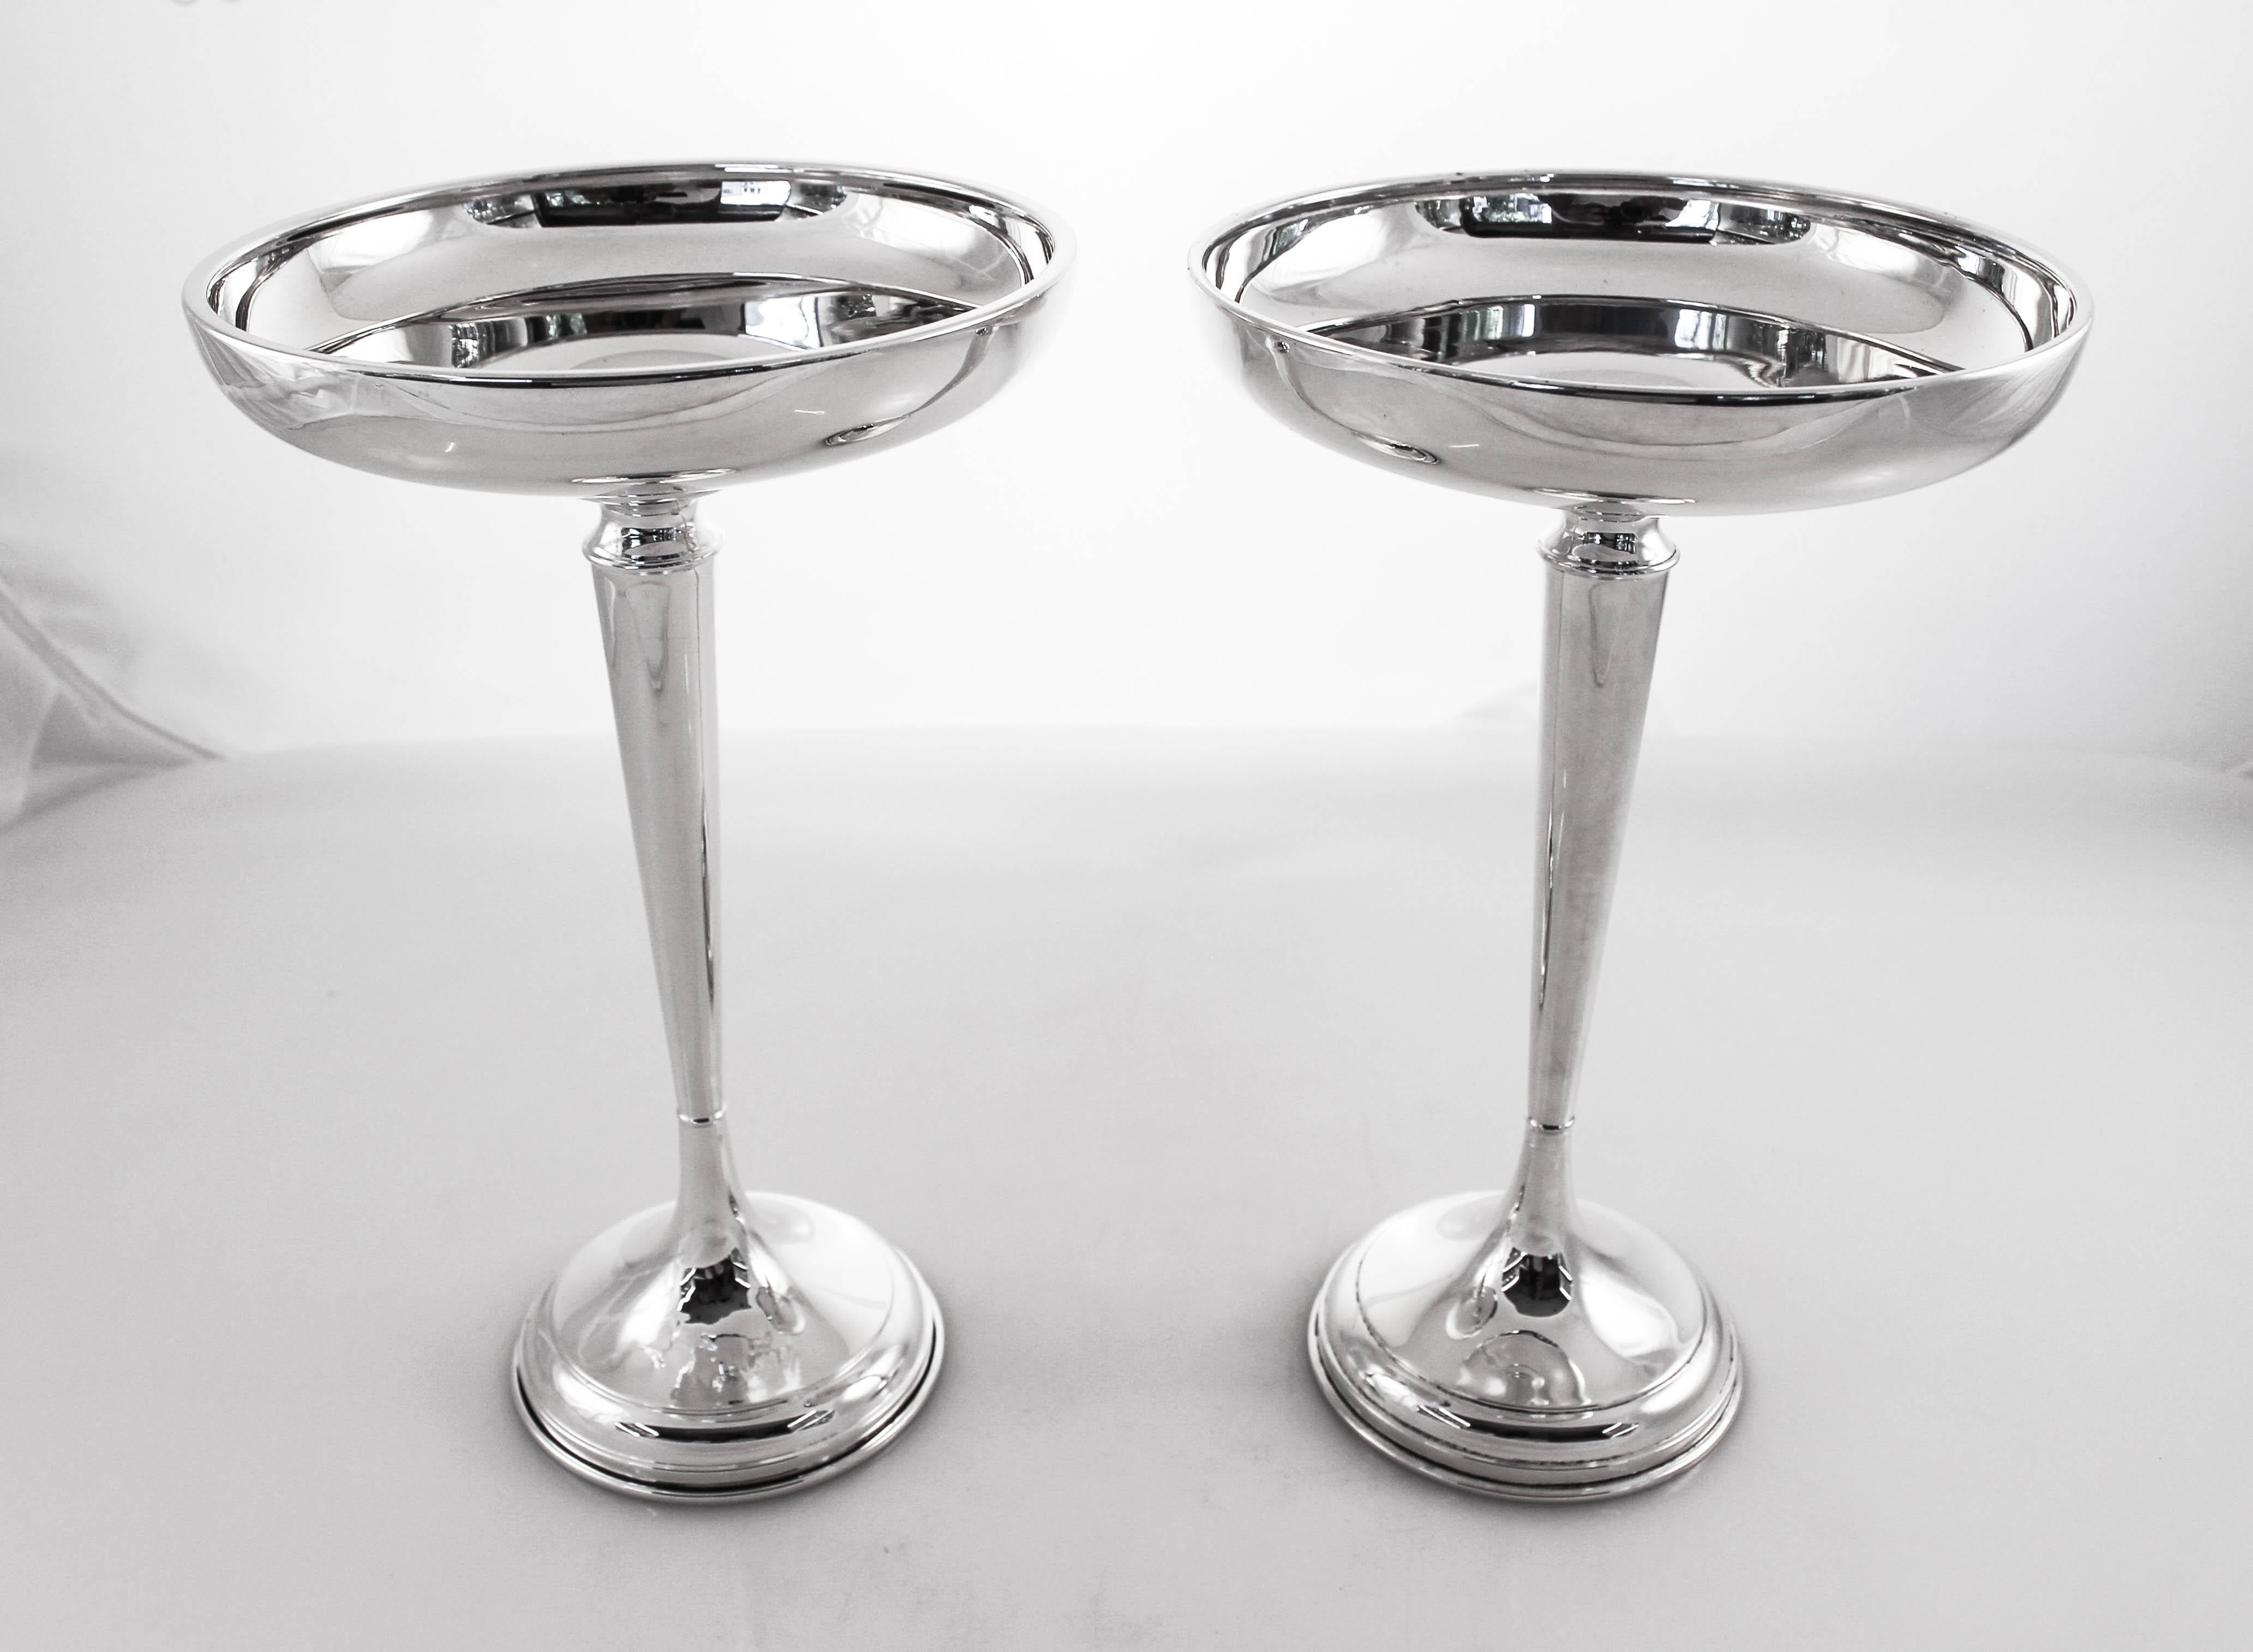 We are proud to offer this pair of sterling silver compotes that were retailed by the world famous J. E. Caldwell & Co store in Philadelphia. They are super clean; no etchings or decoration. The top has a rim that curves up insuring whatever is in